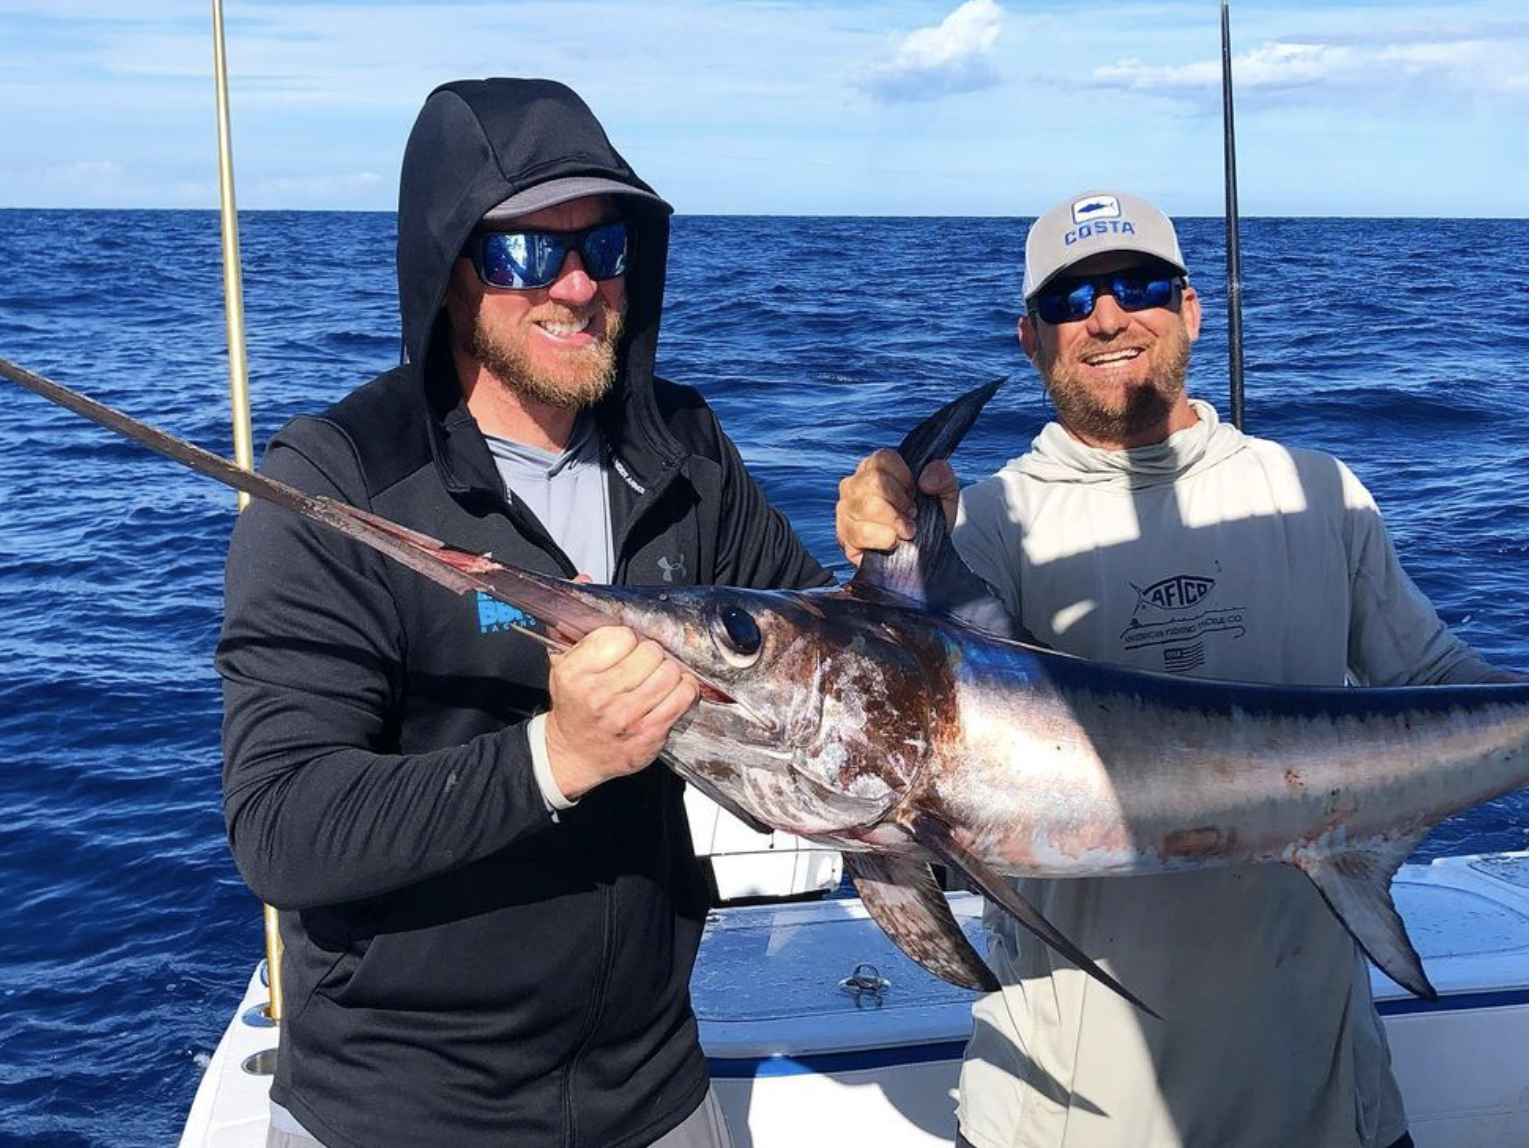 Two friends on a swordfish fishing charter in Florida, proudly holding their catch with the ocean as a stunning backdrop, highlighting the exhilarating experience of a successful fishing trip.